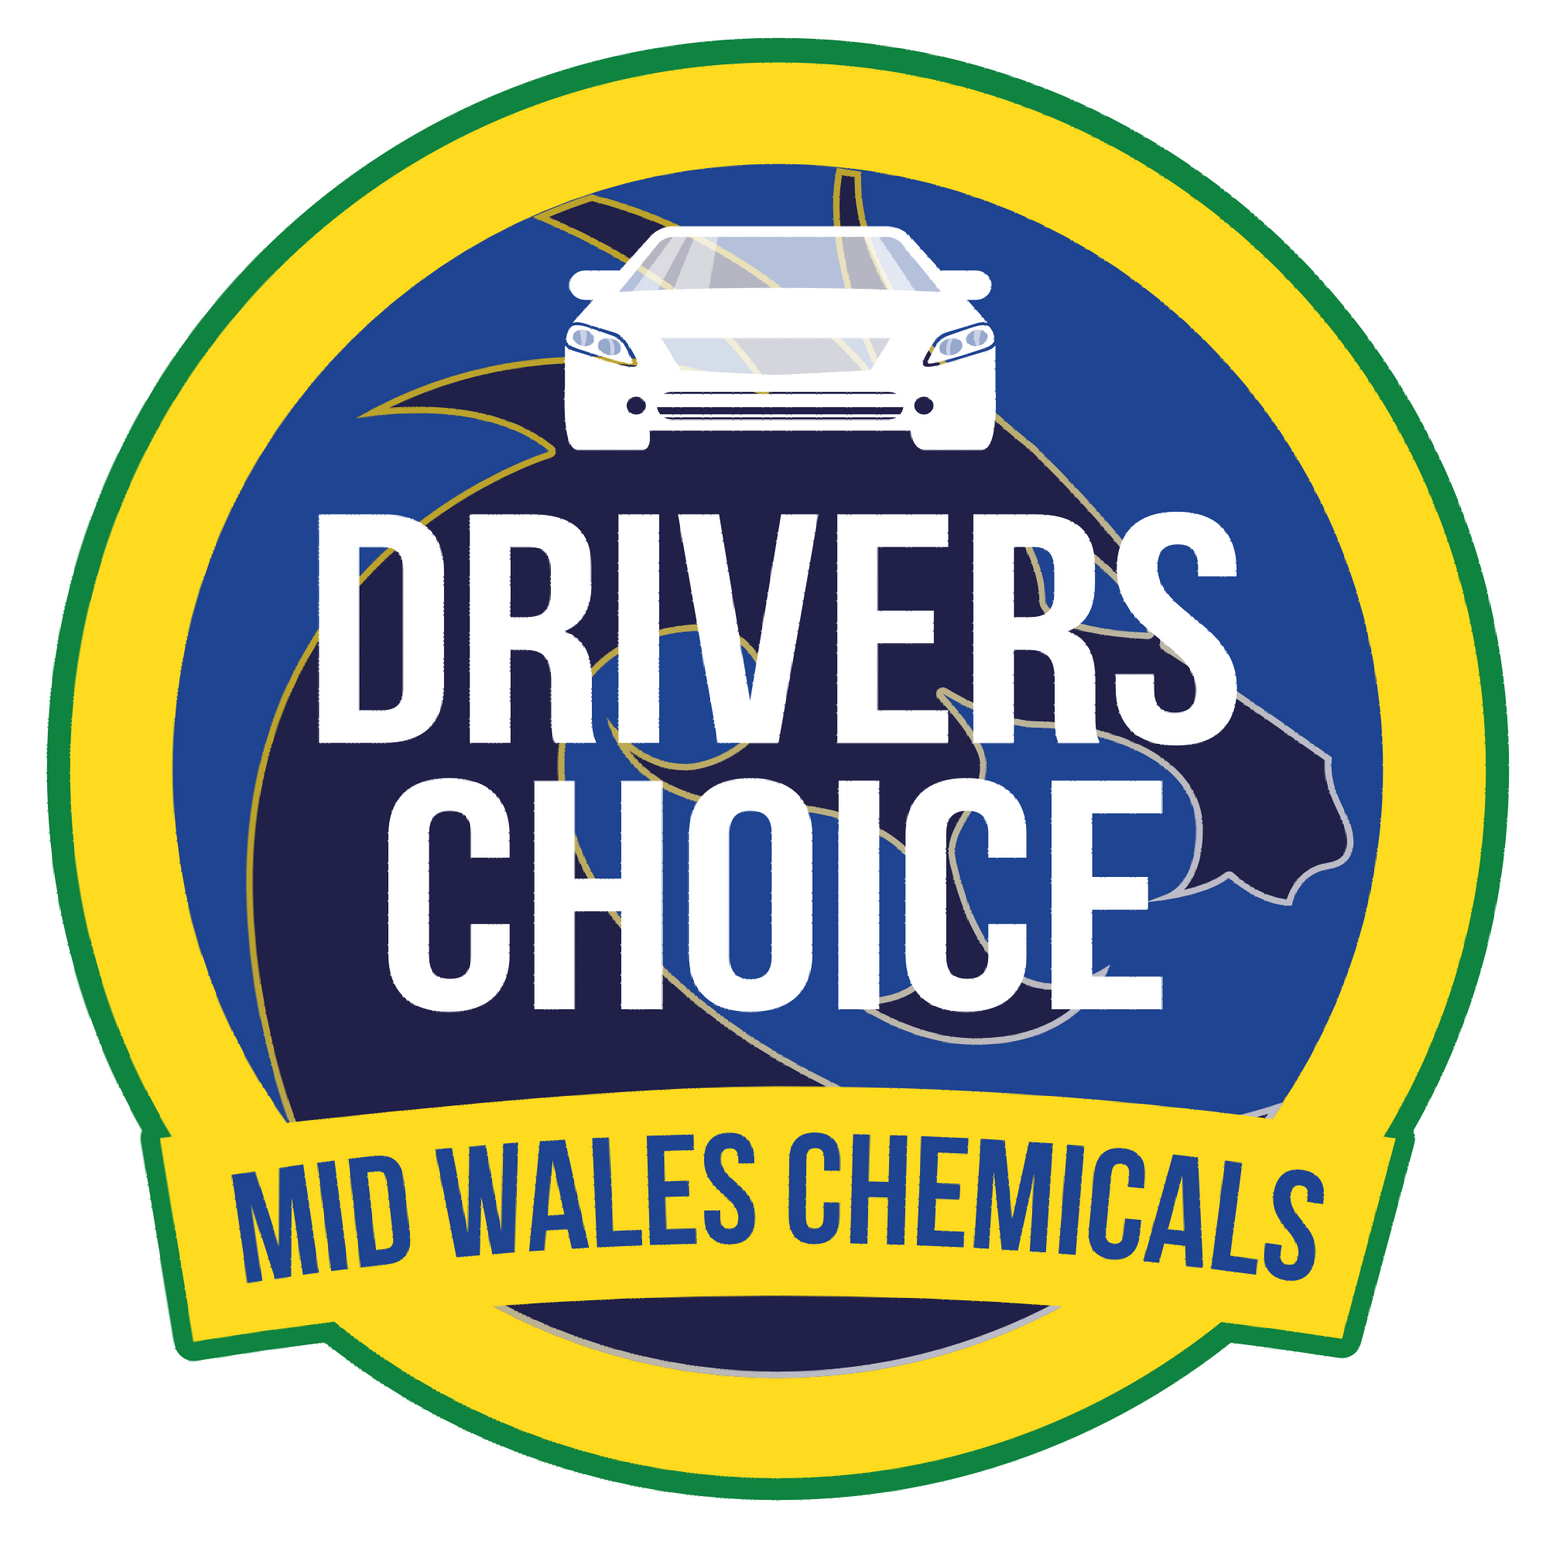 Drivers Choice Products